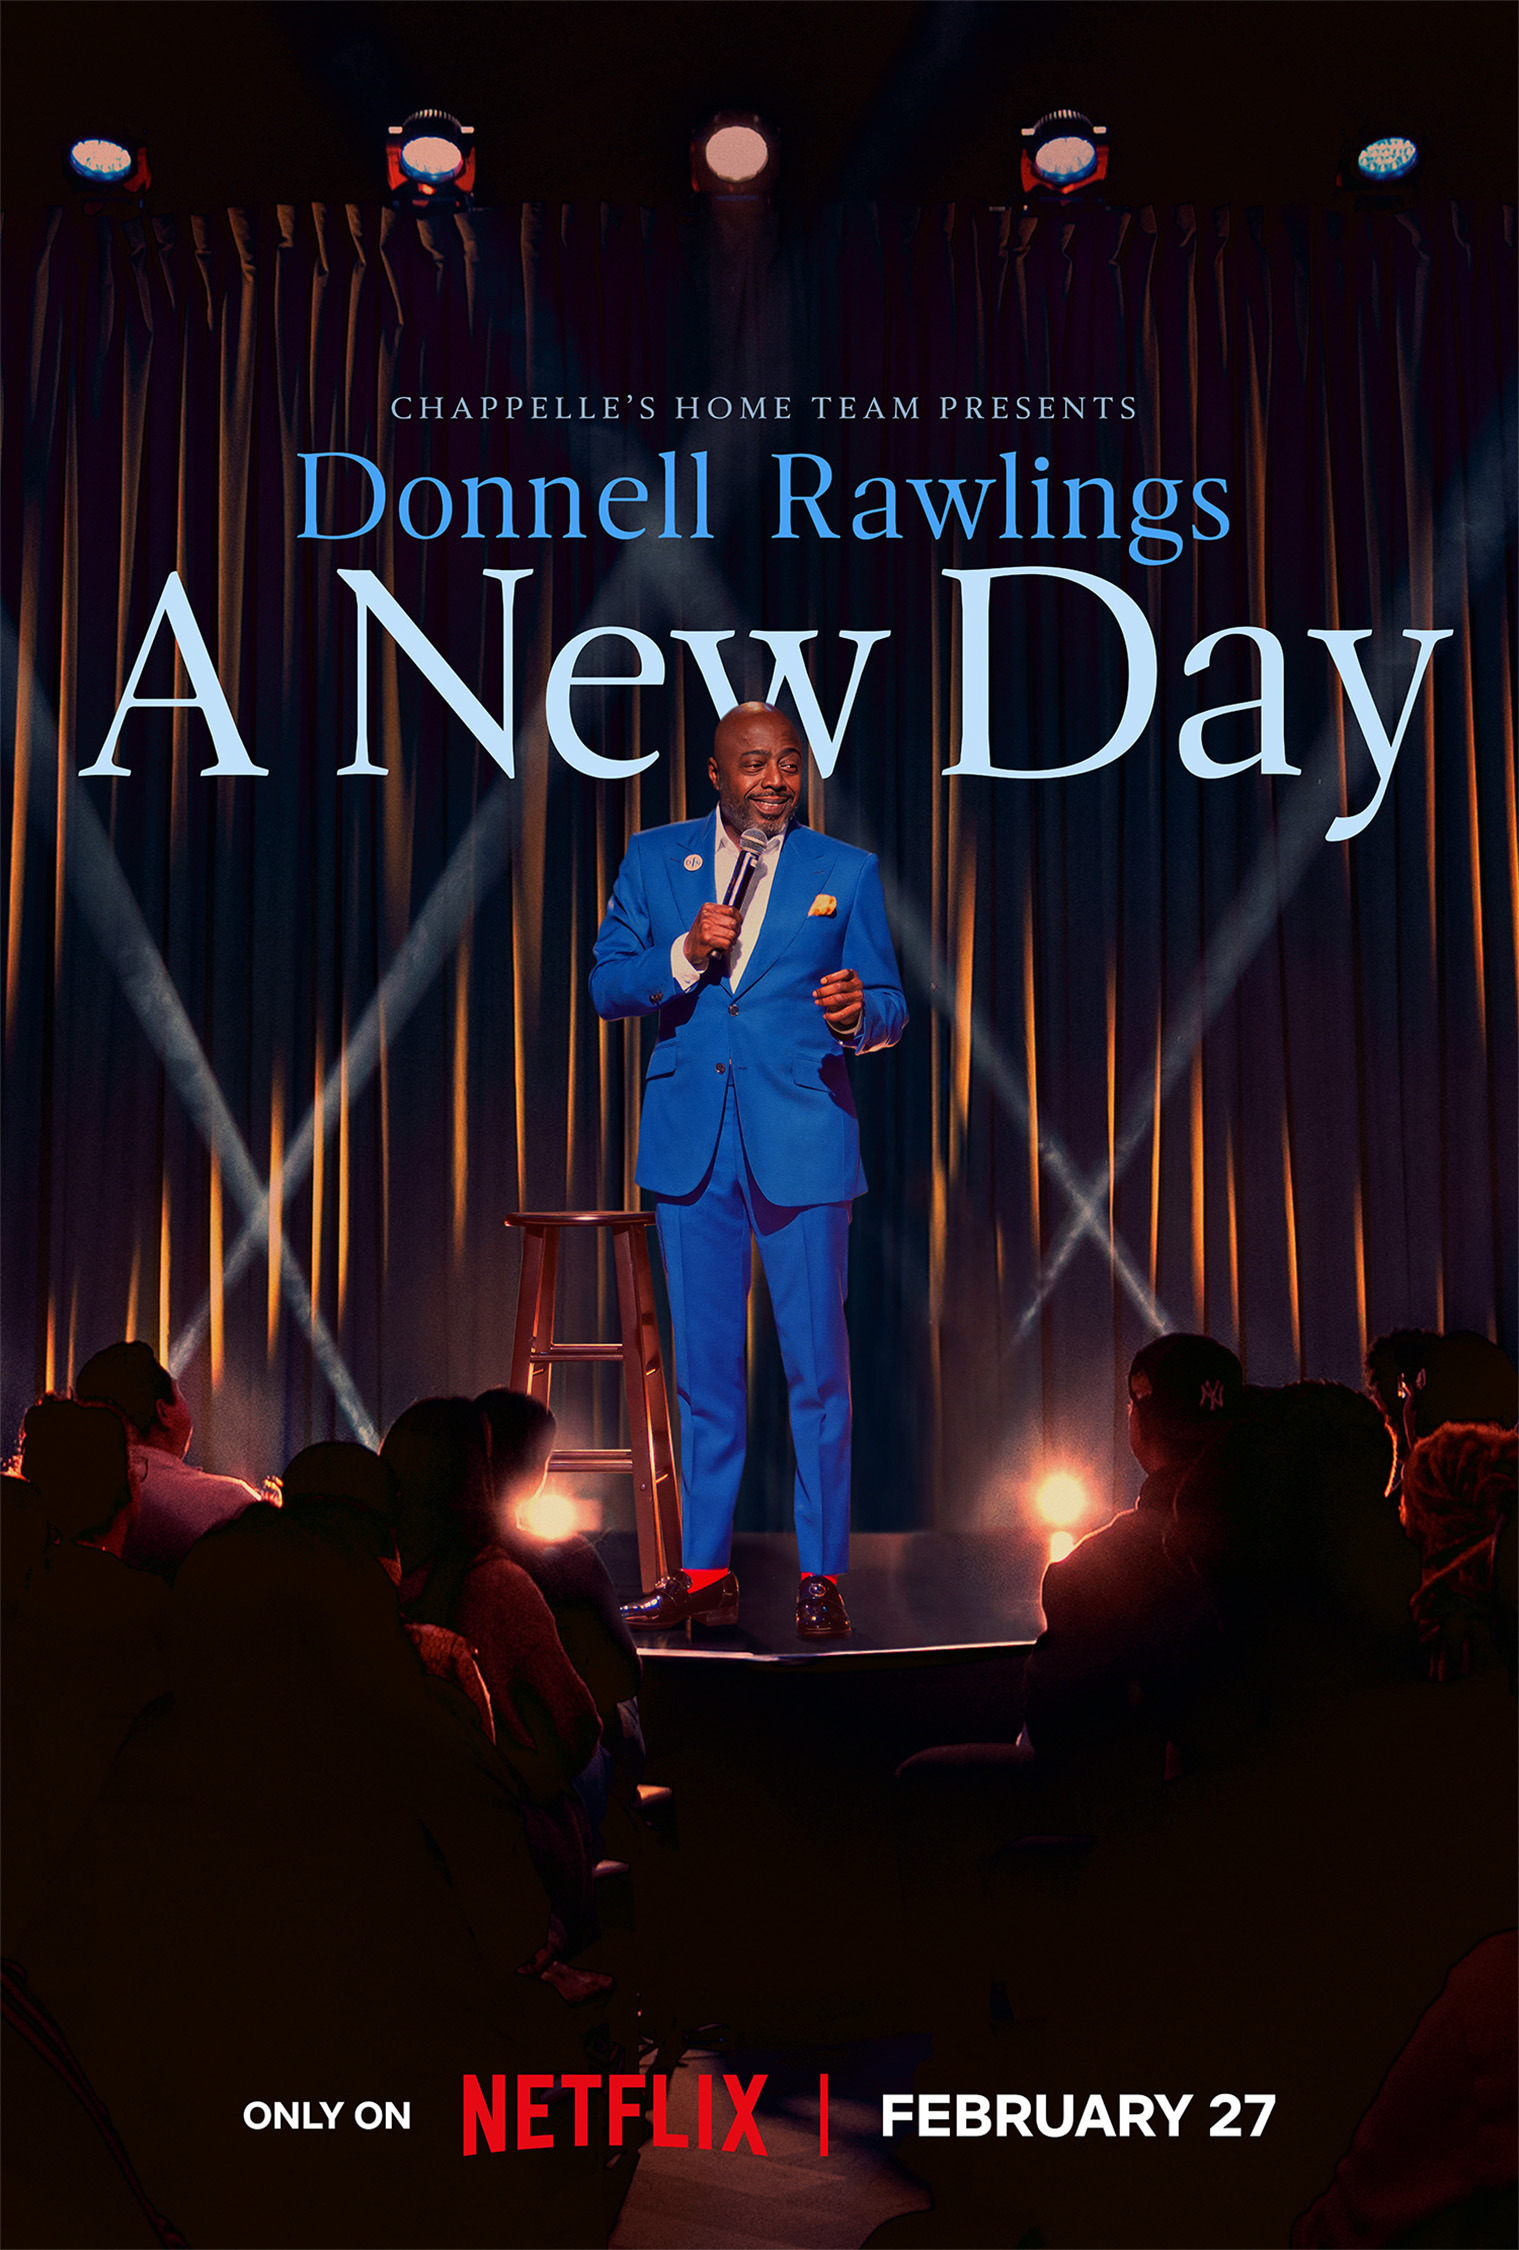 Mega Sized TV Poster Image for Chappelle's Home Team - Donnell Rawlings: A New Day 